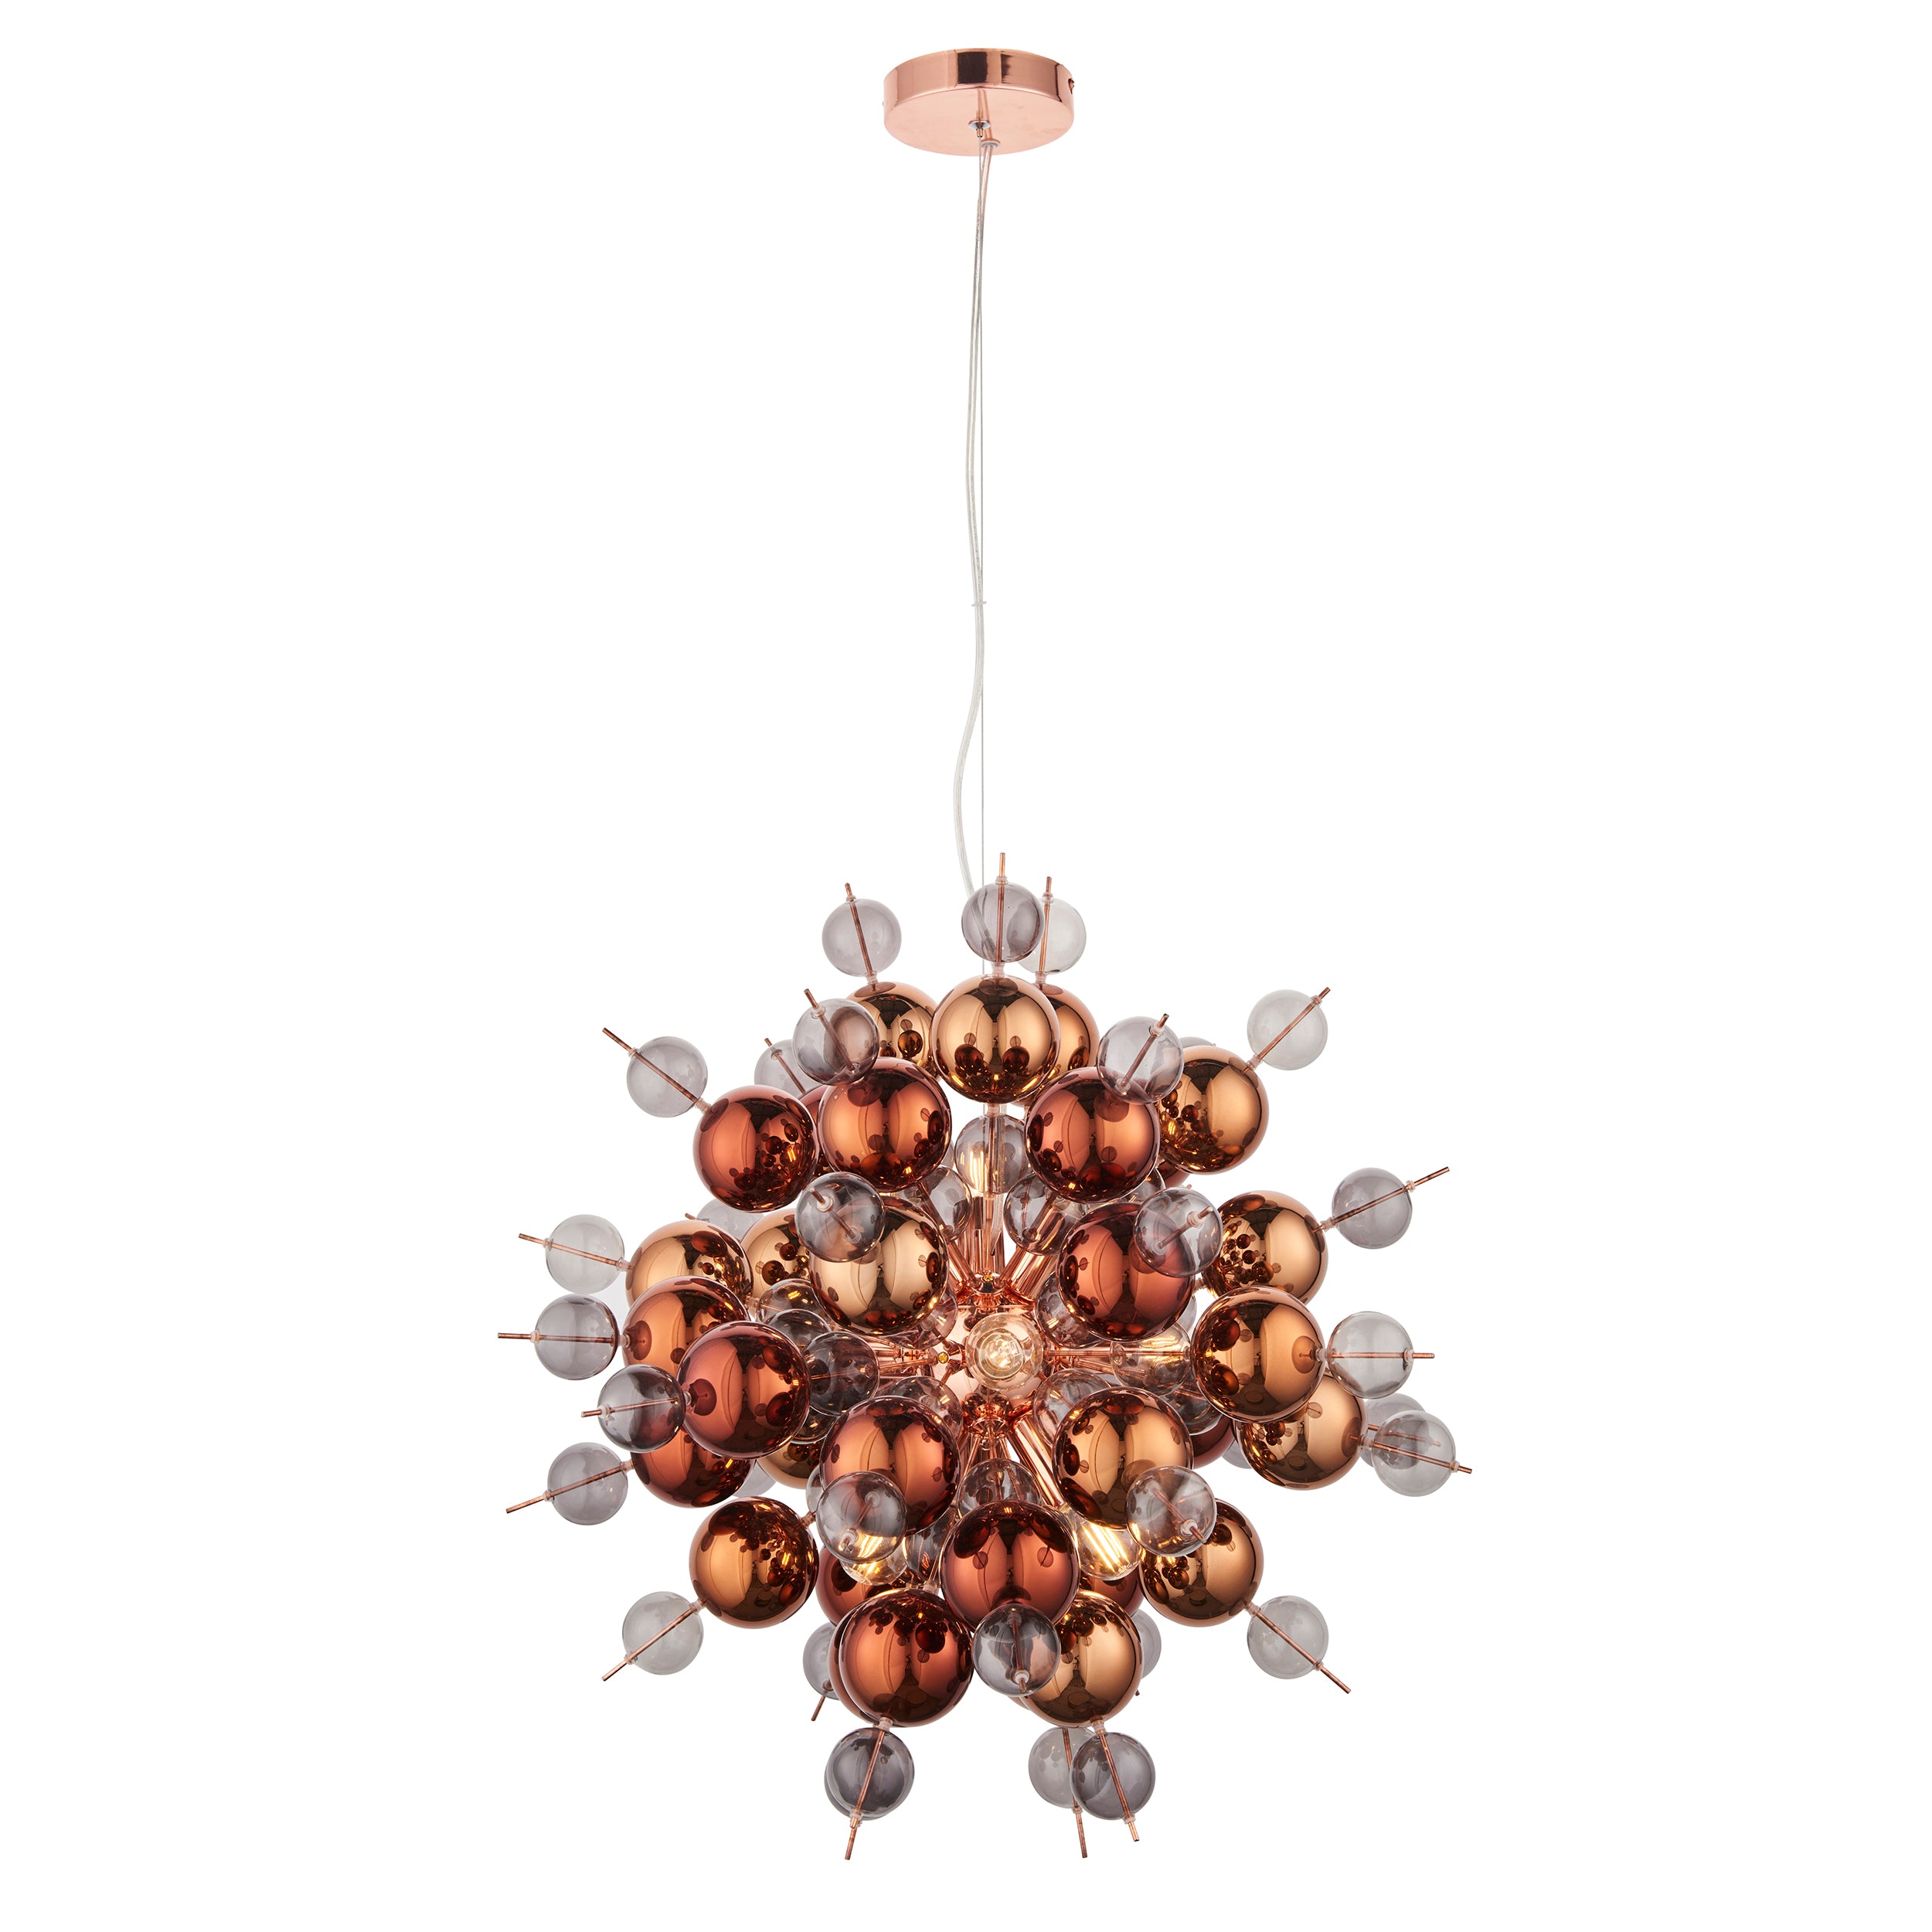 Lightologist Copper plate with copper mirror & tinted glass Multi arm lamp Pendant Light